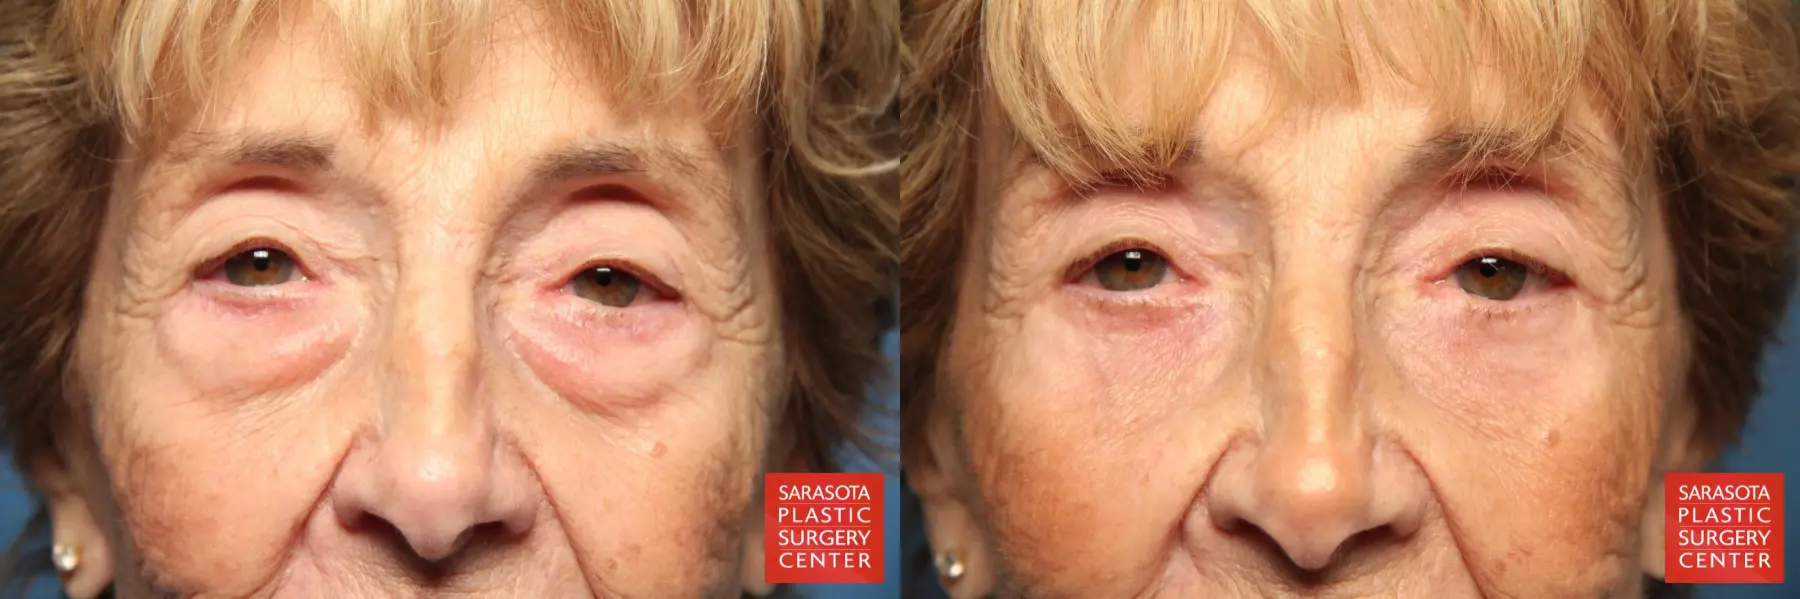 Eyelid Surgery: Patient 12 - Before and After  